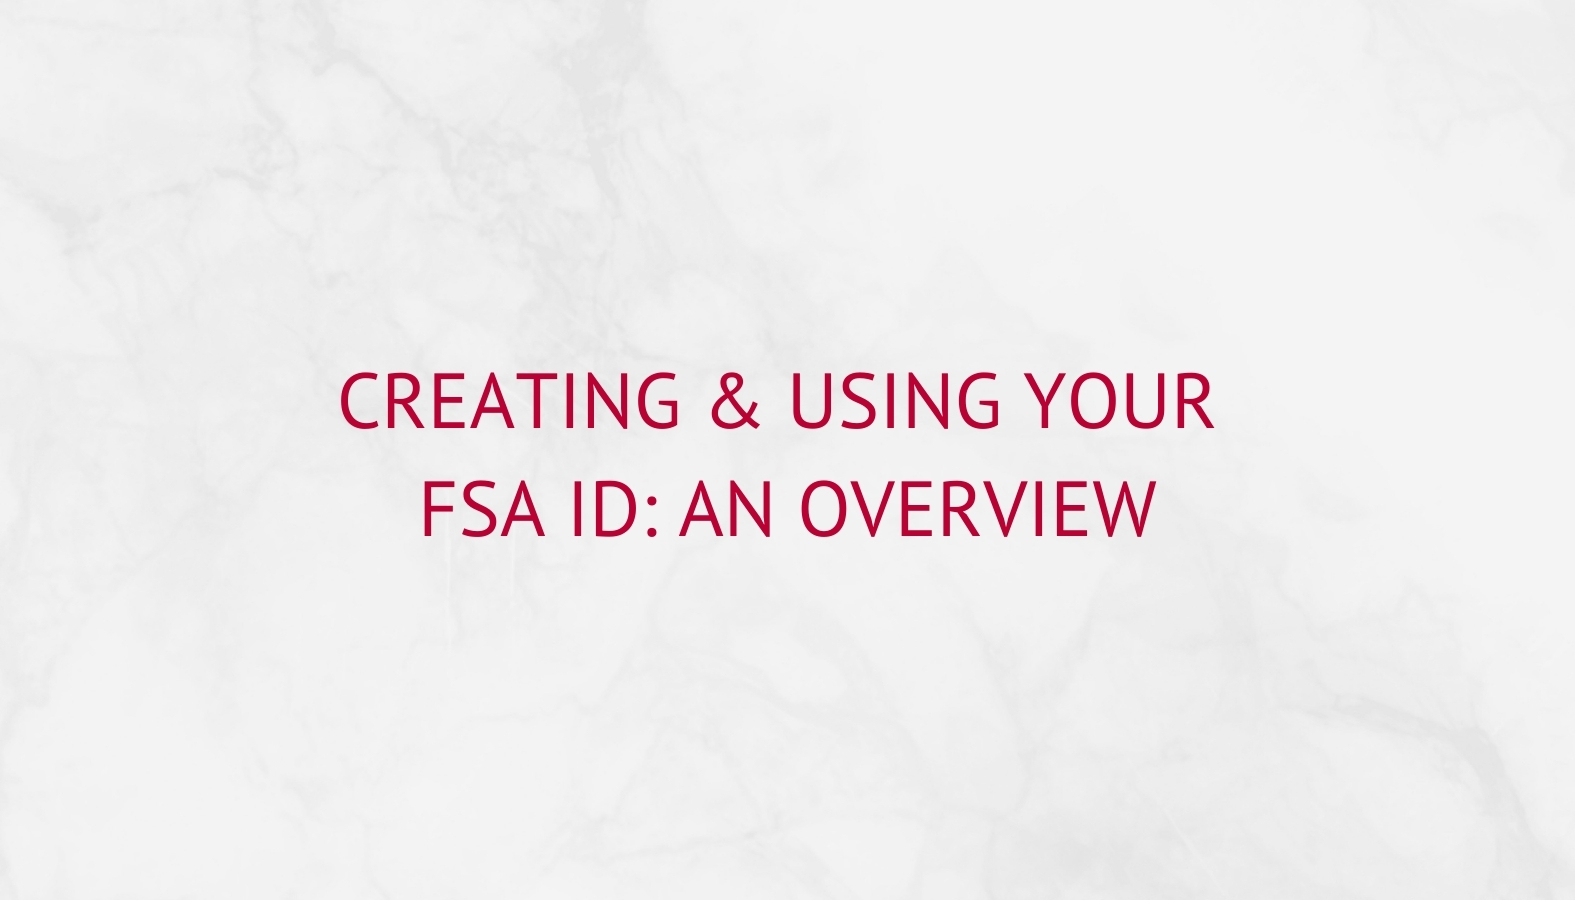 creating--using-your-fsa-id-an-overview.jpg